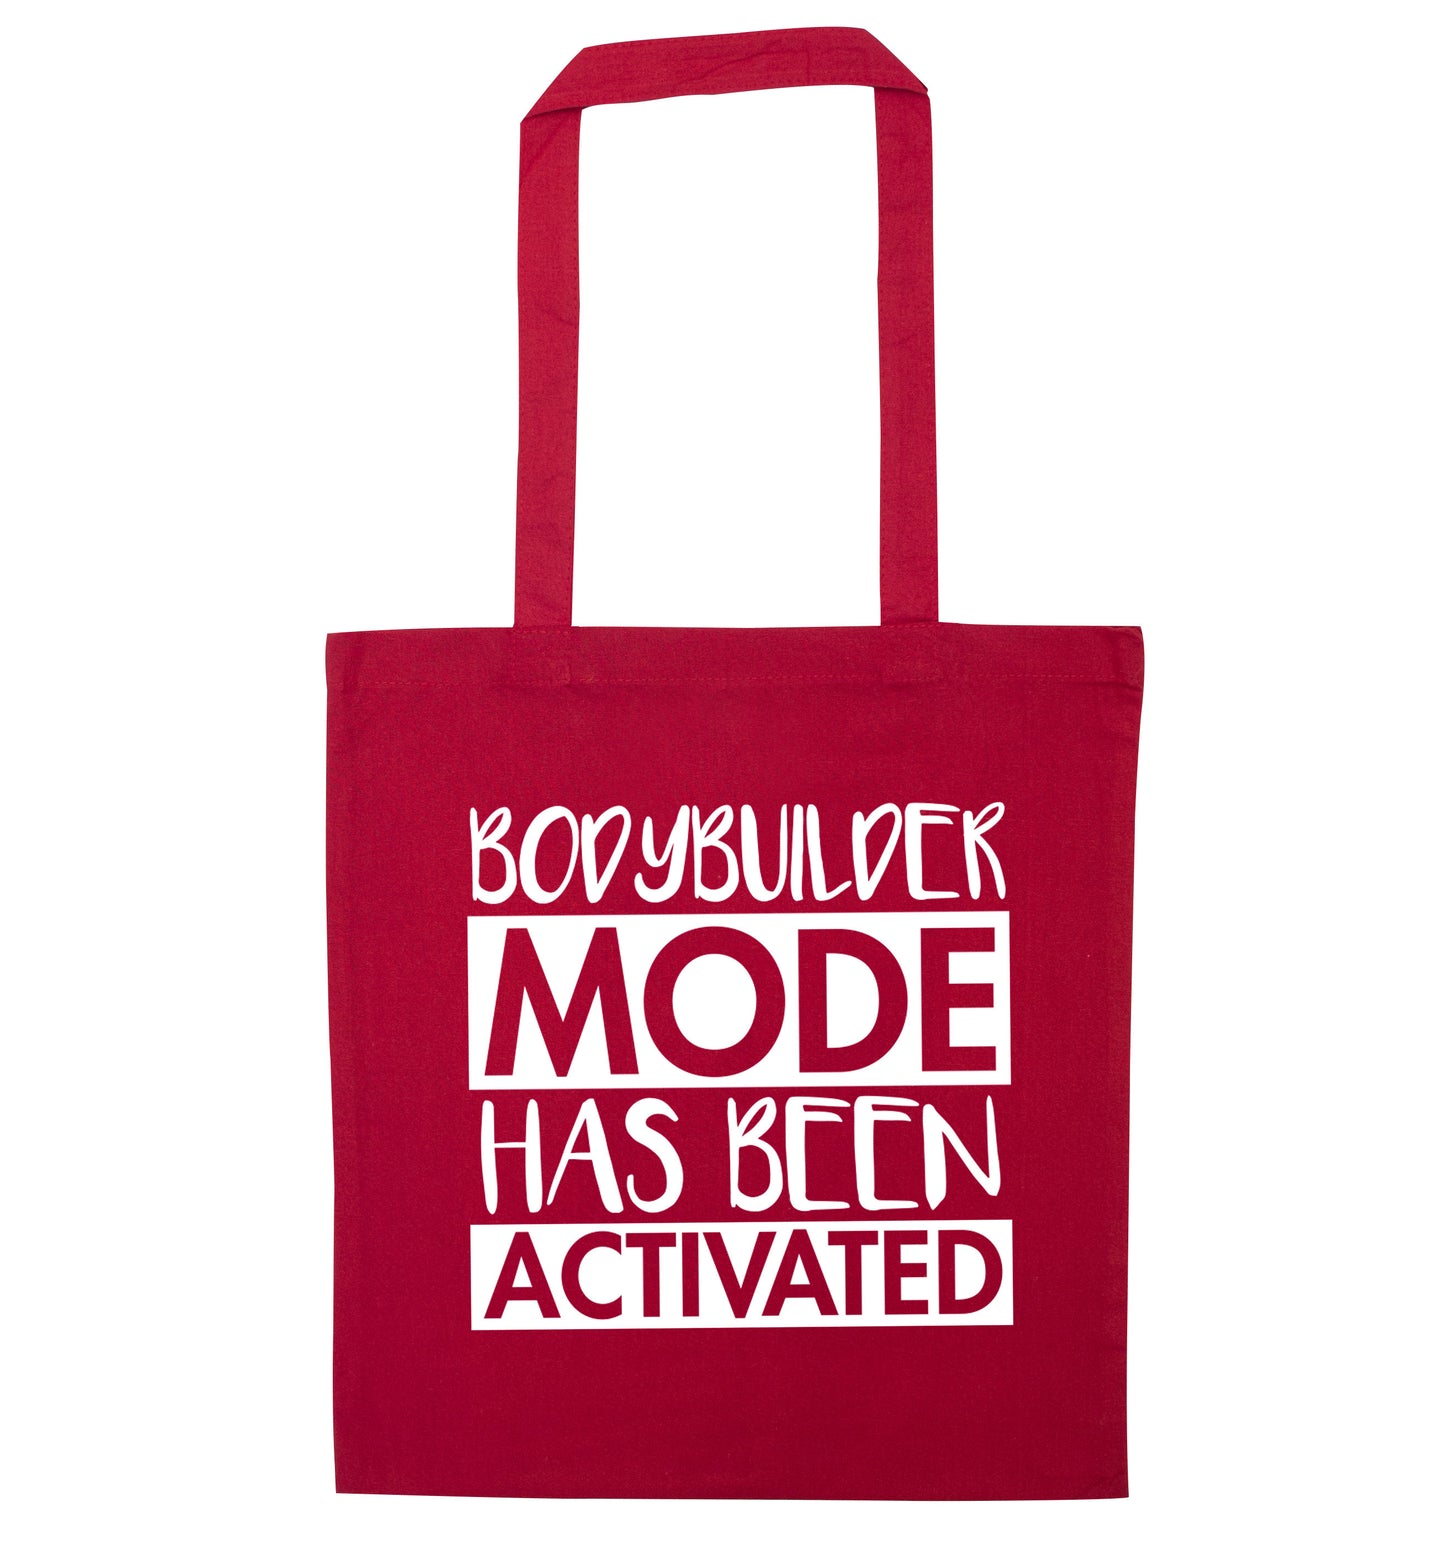 Bodybuilder mode activated red tote bag